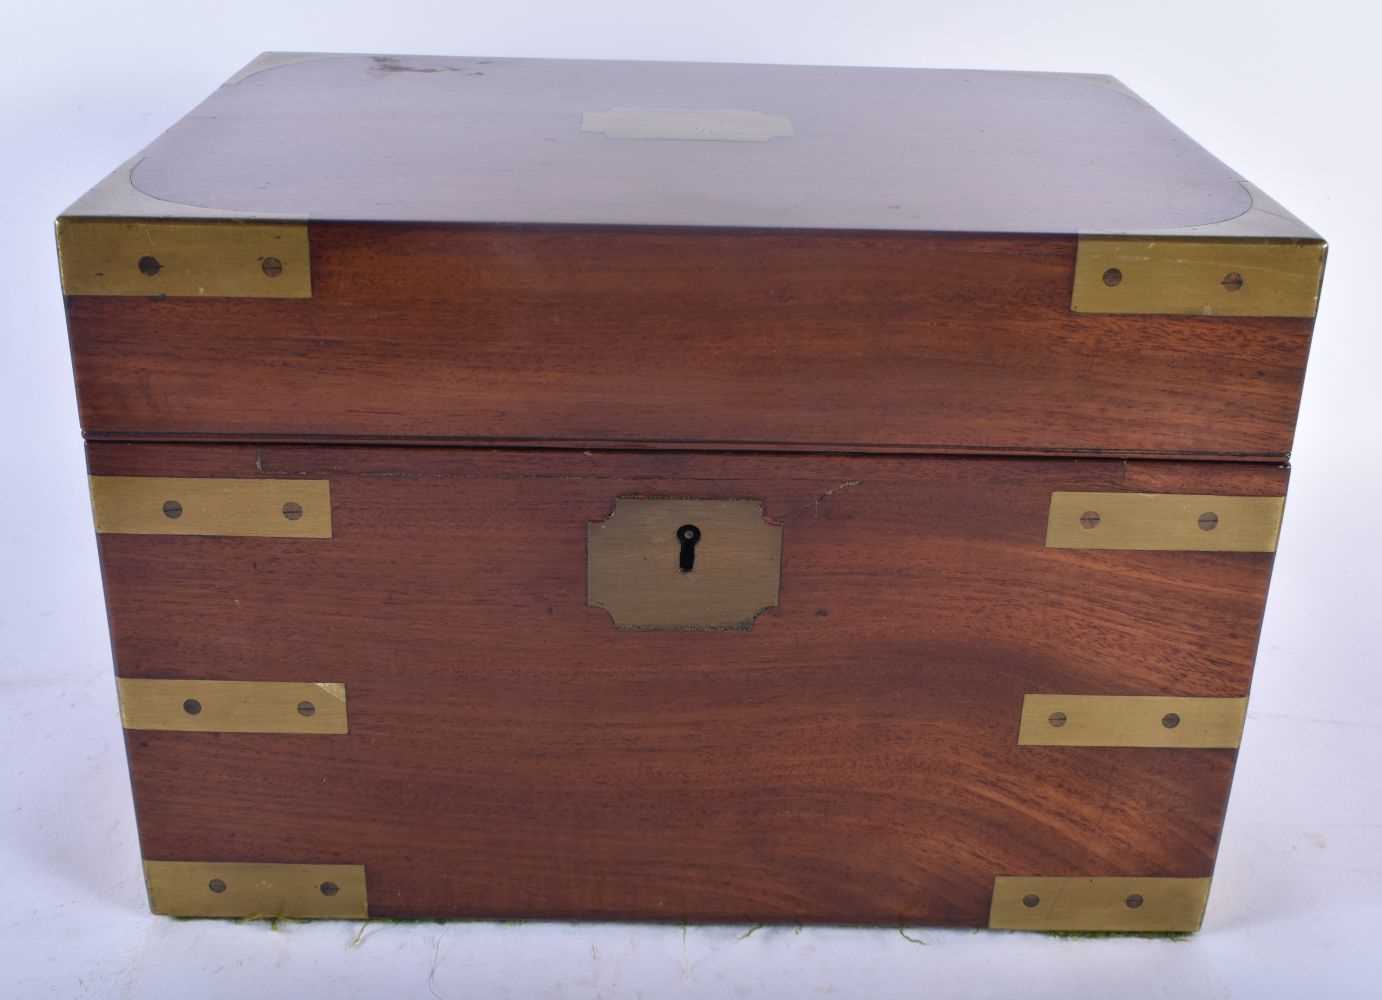 A RARE LARGE 19TH CENTURY MAHOGANY BRASS BOUND CAMPAIGN JEWELLERY BOX with fully fitted interior. 28